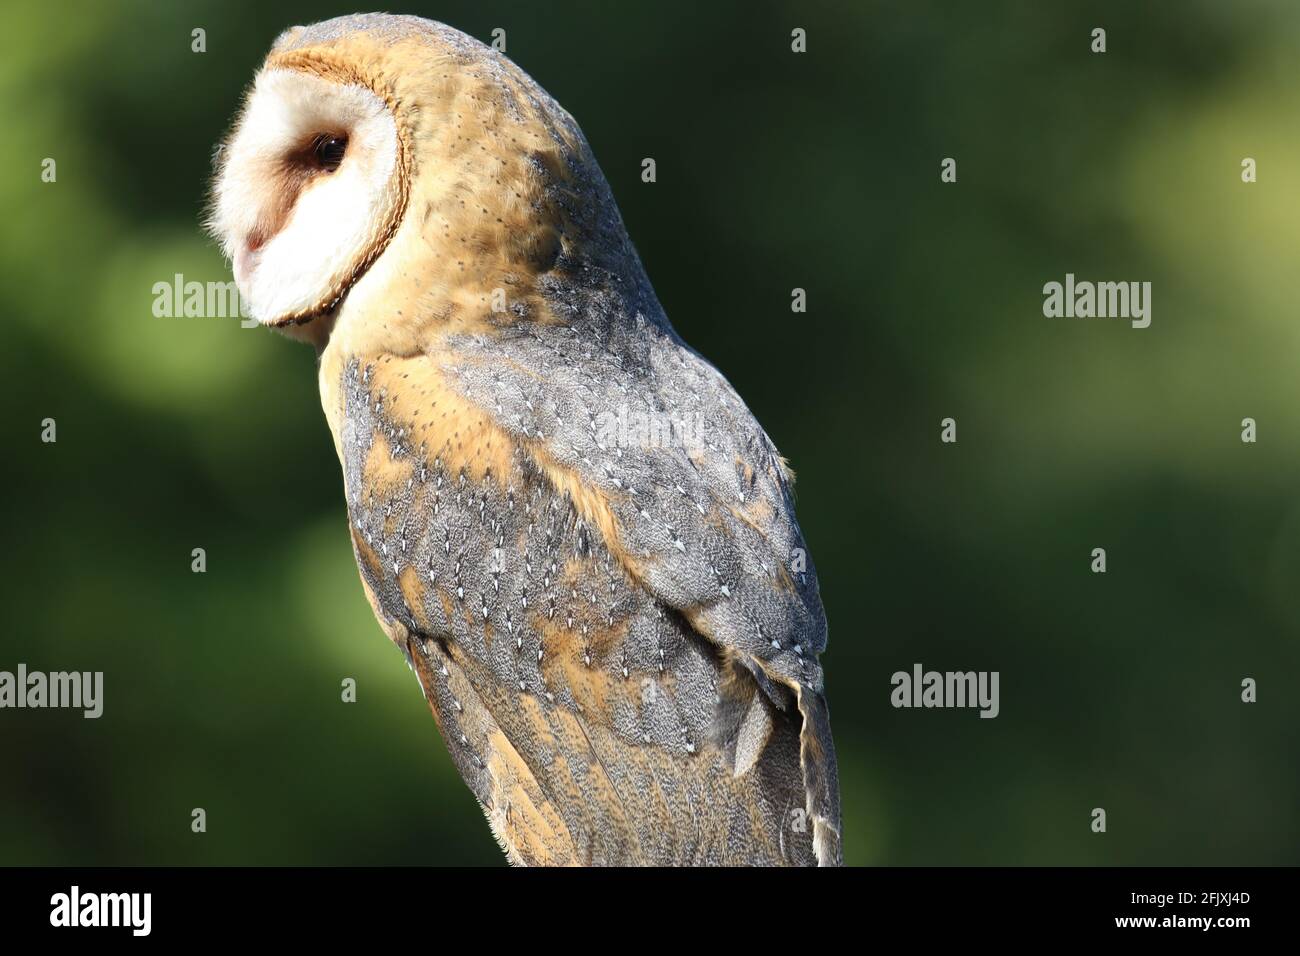 Beautiful barn owl outside in daytime on green background Stock Photo